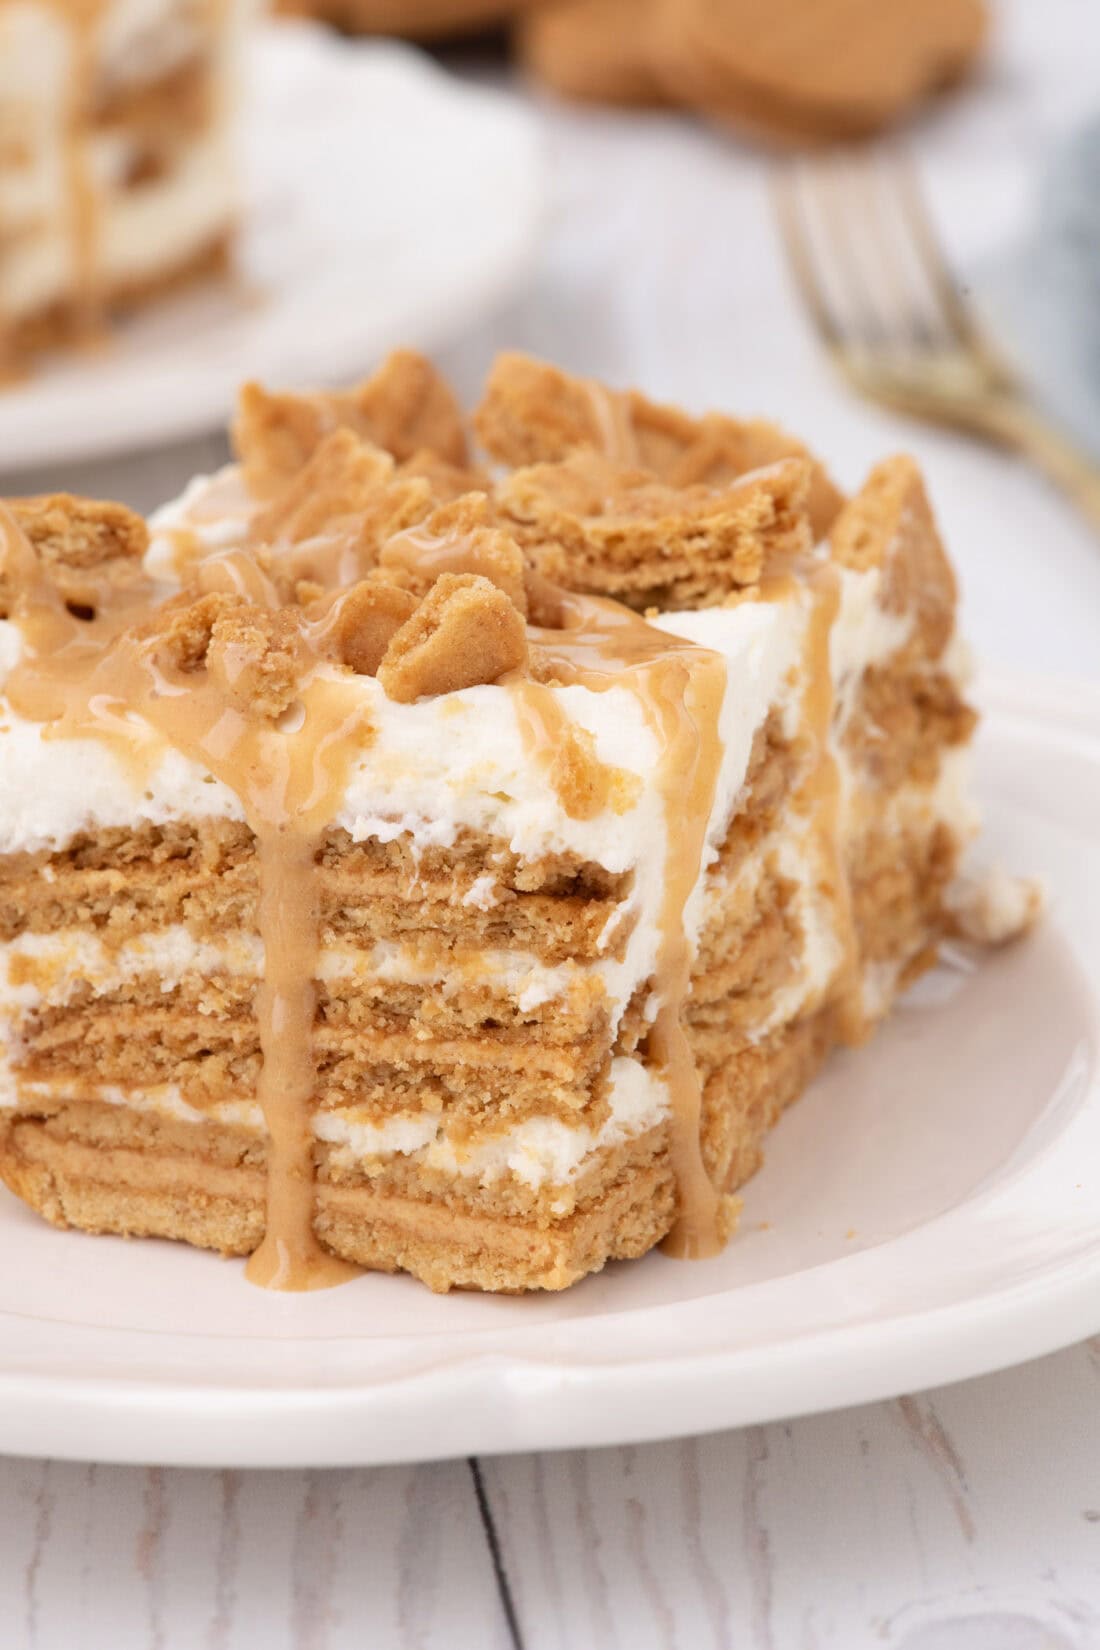 Close up photo of a slice of Nutter Butter Icebox Cake